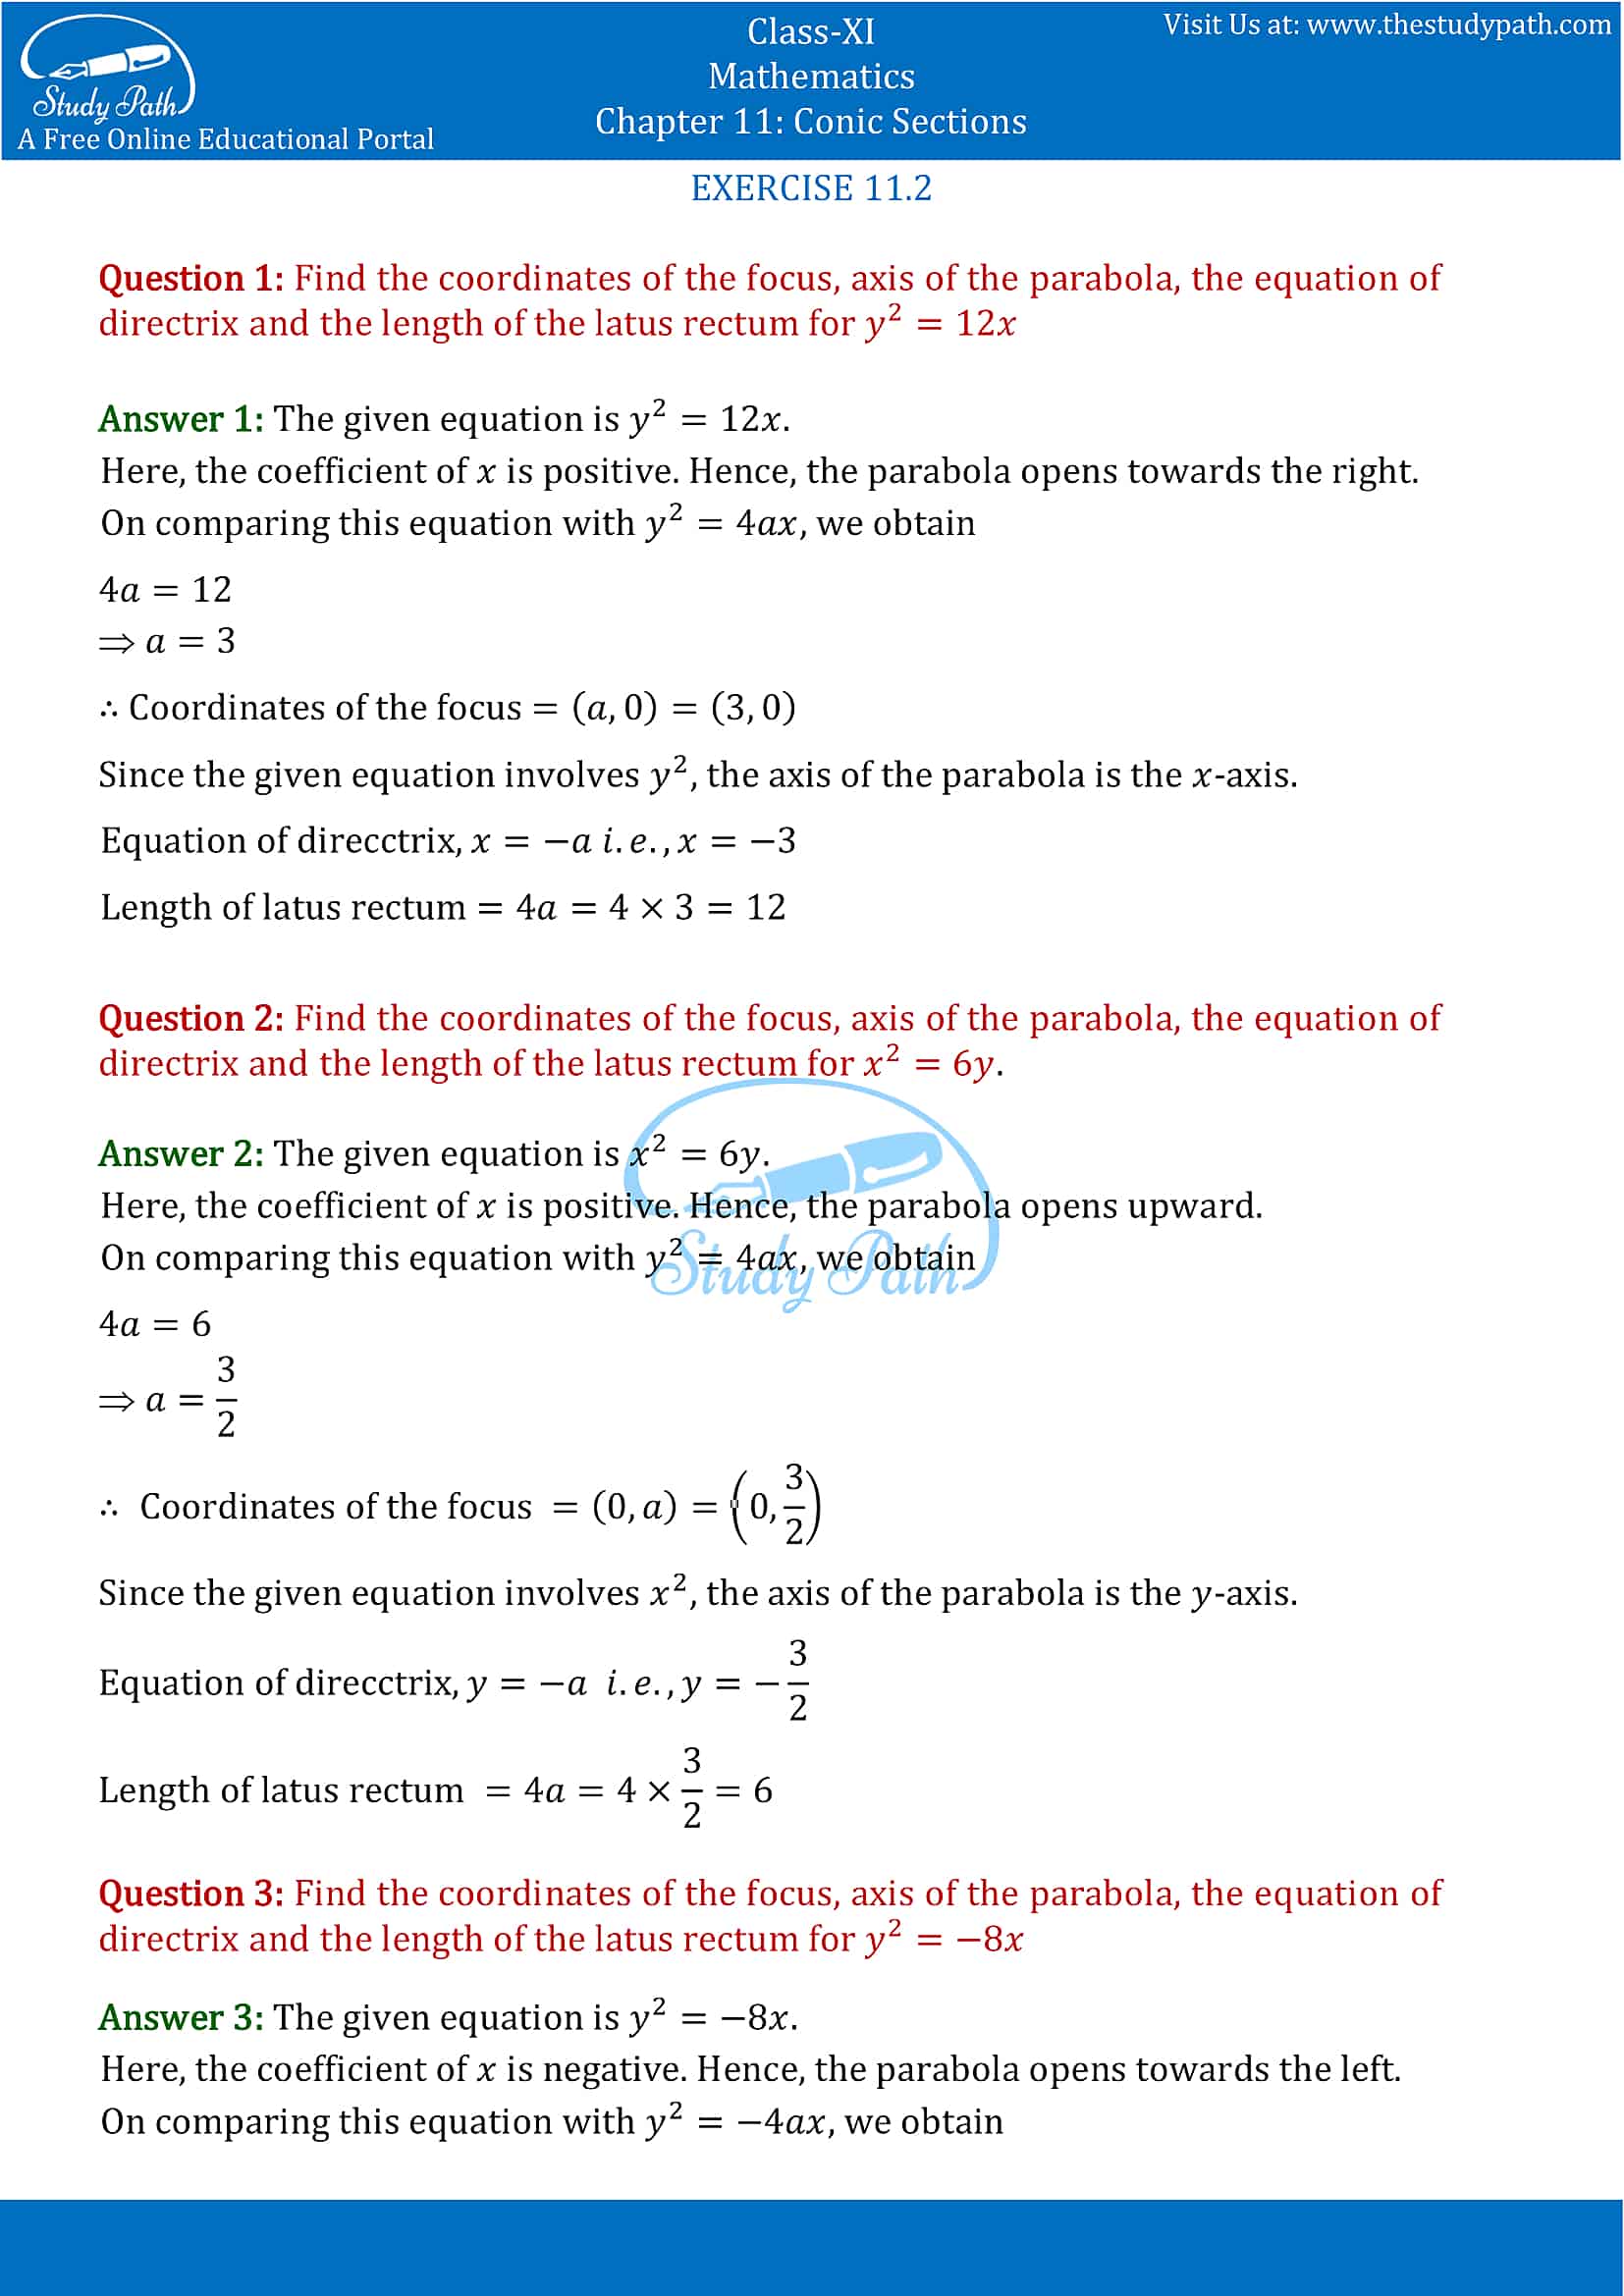 NCERT Solutions for Class 11 Maths chapter 11 Conic Section Exercise 11.2 Part-1